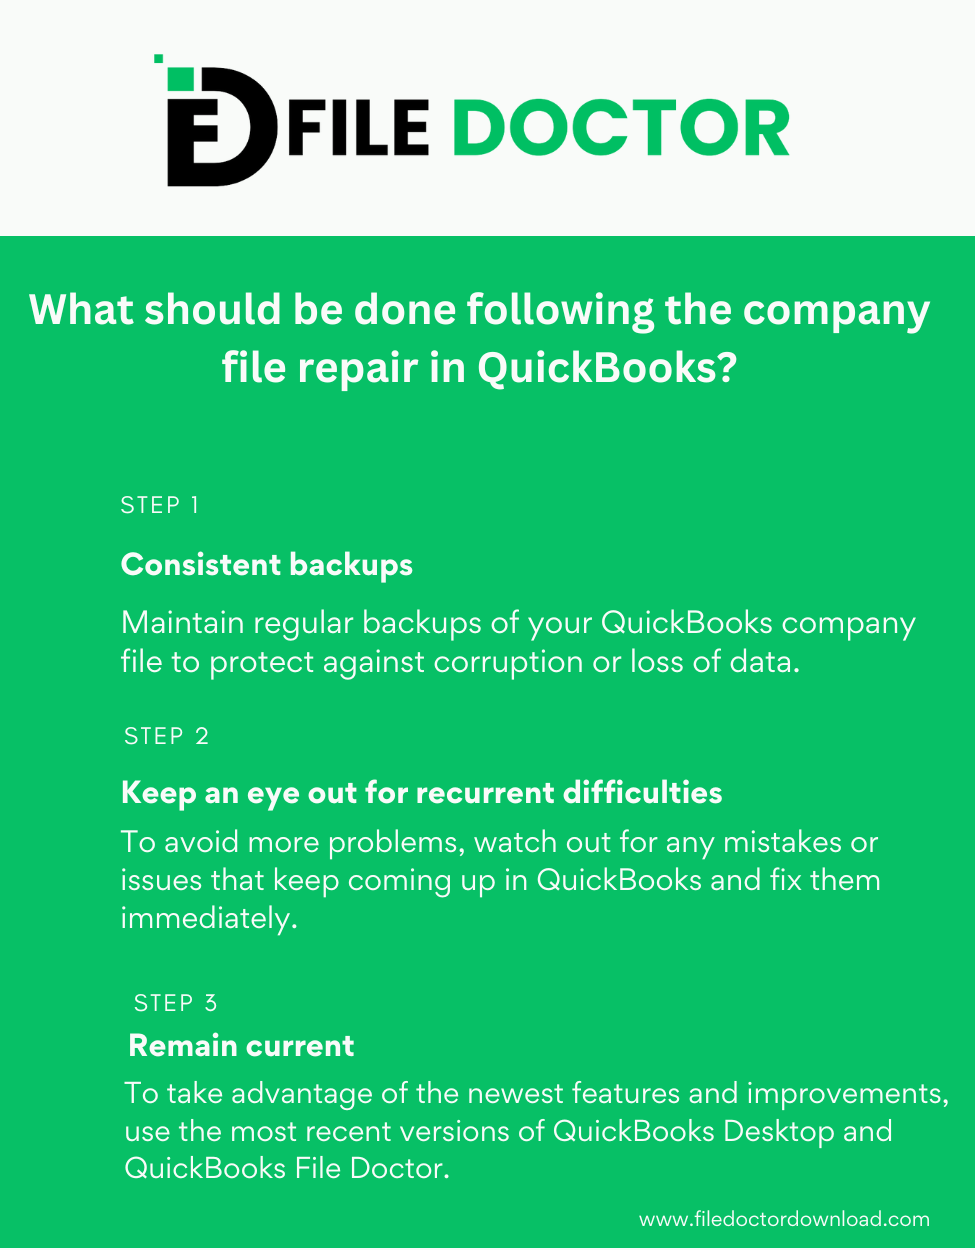 What should be done following the company file repair in QuickBooks